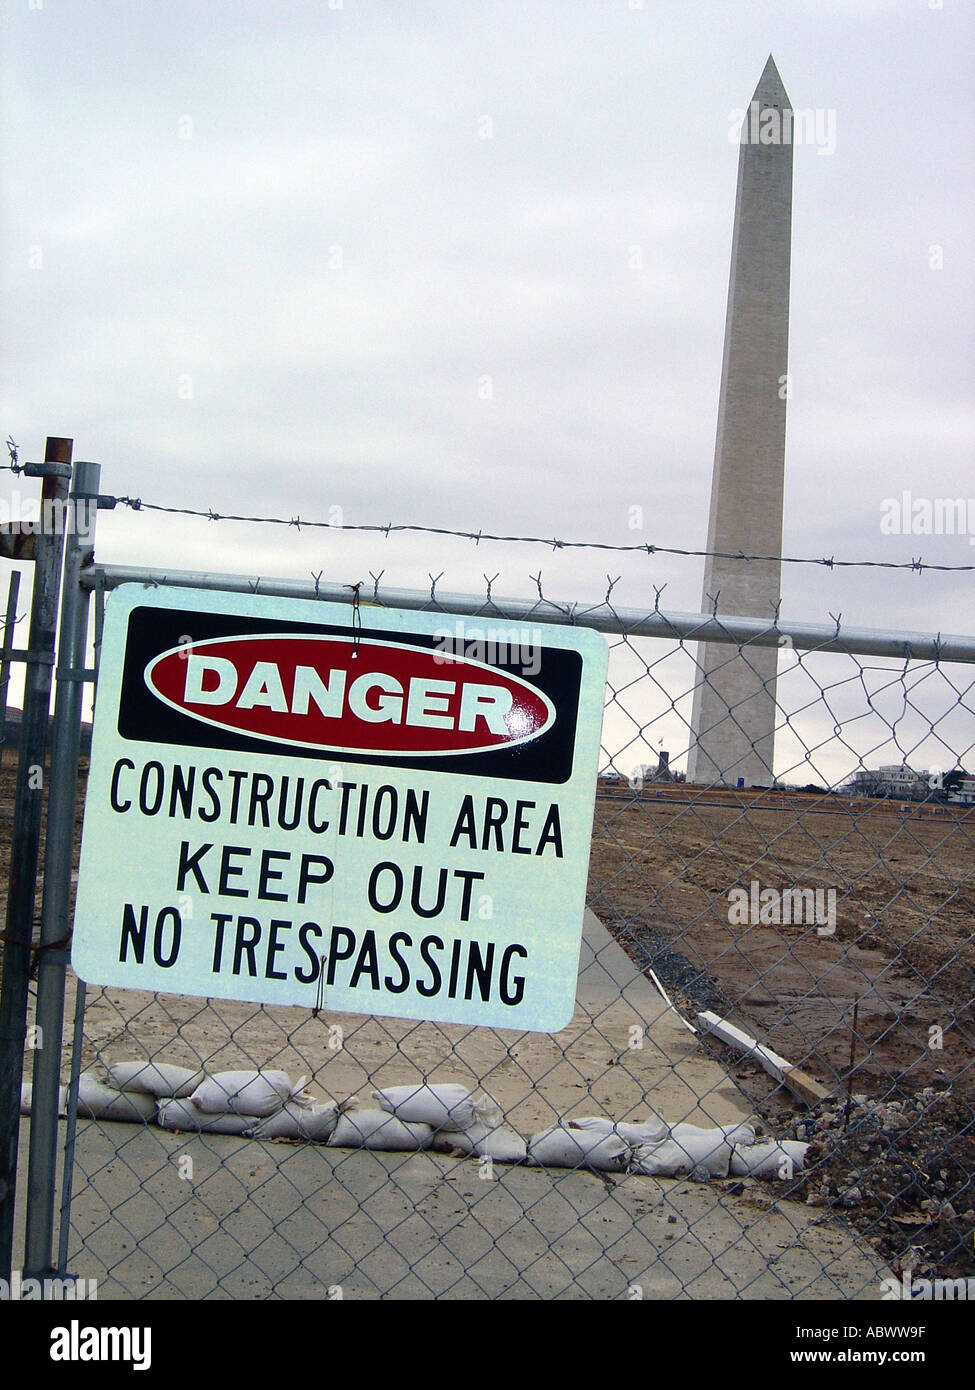 Washington Monument Chain Link Fence and Danger Construction Area Keep Out No Trespassing Sign Washington DC USA Stock Photo